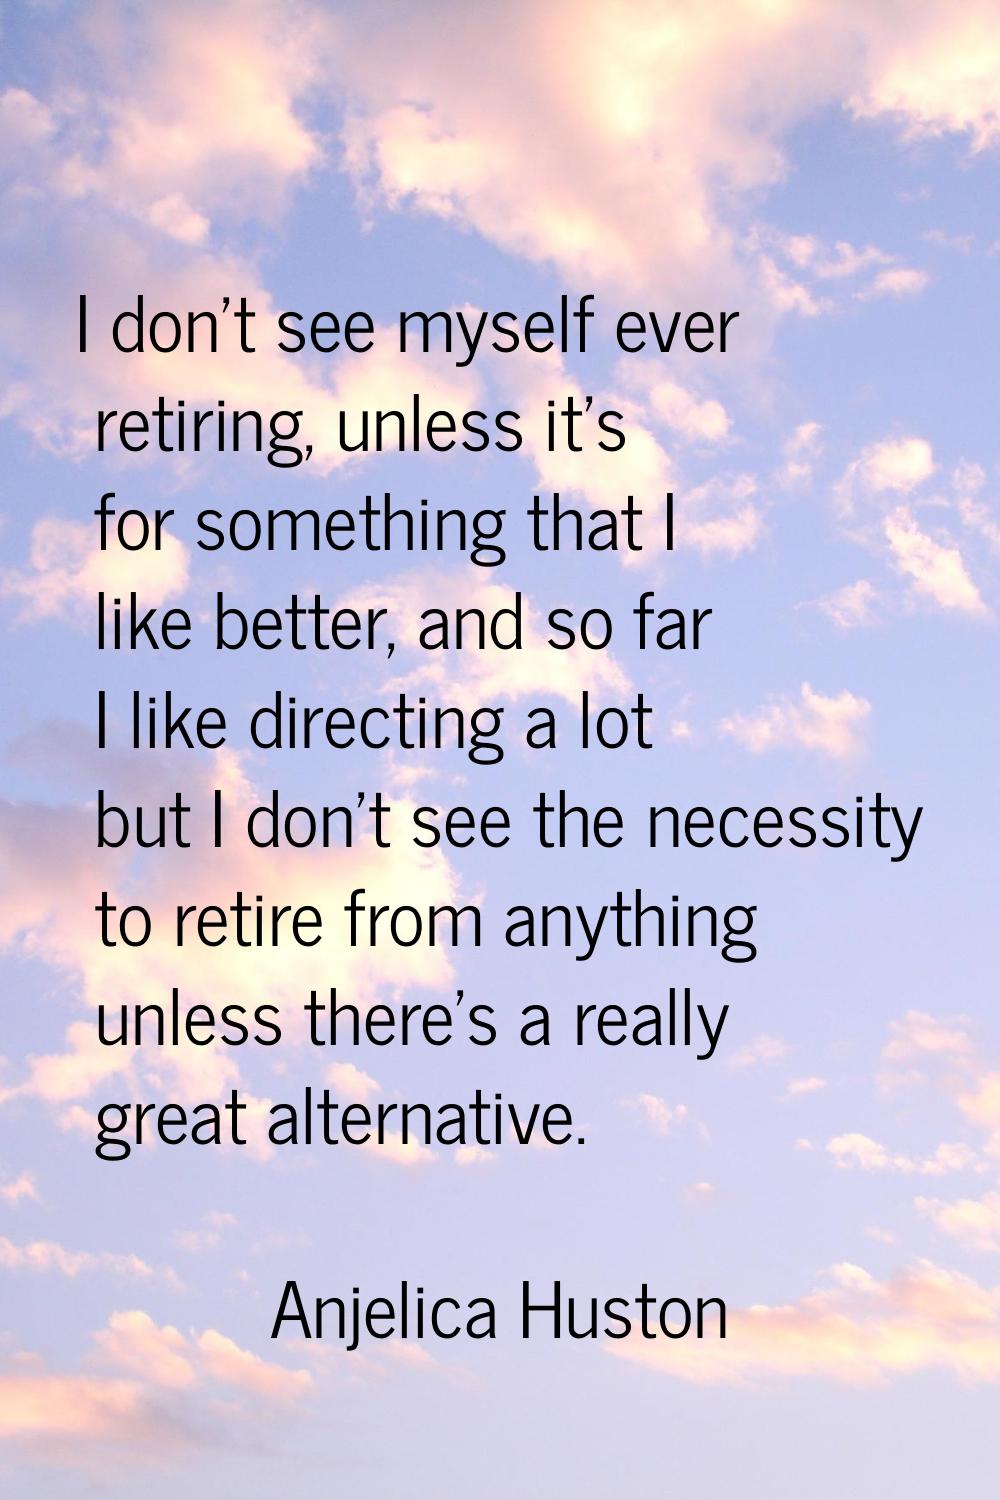 I don't see myself ever retiring, unless it's for something that I like better, and so far I like d